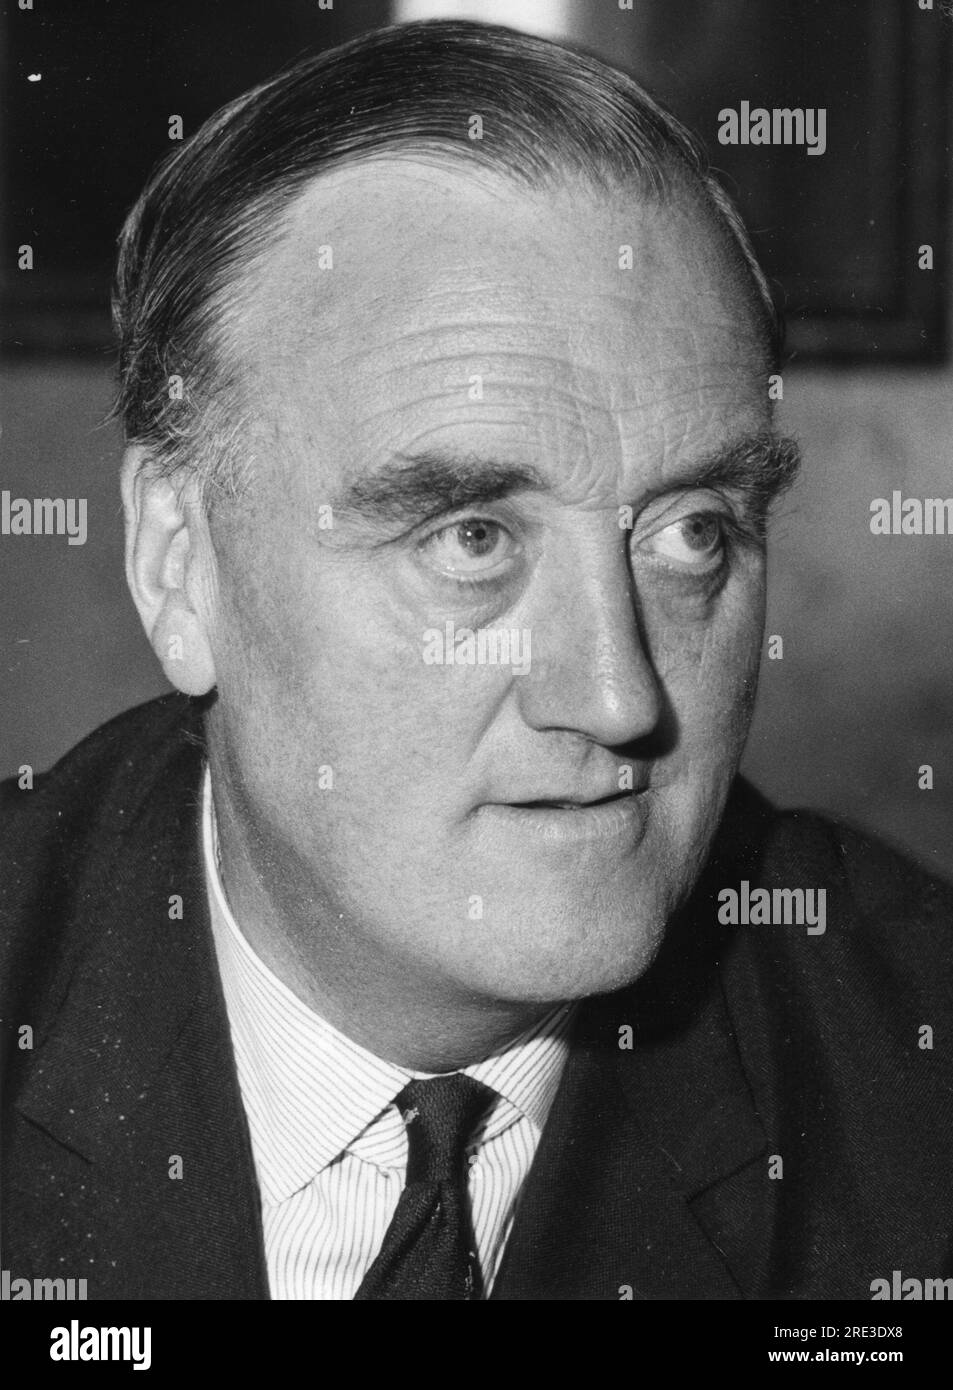 Whitelaw, William 'Willie', 1. Viscount Whitelaw, 28.6.1918 - 1,7.1999, schottischer Politiker (Cons.), ADDITIONAL-RIGHTS-CLEARANCE-INFO-NOT-AVAILABLE Stockfoto